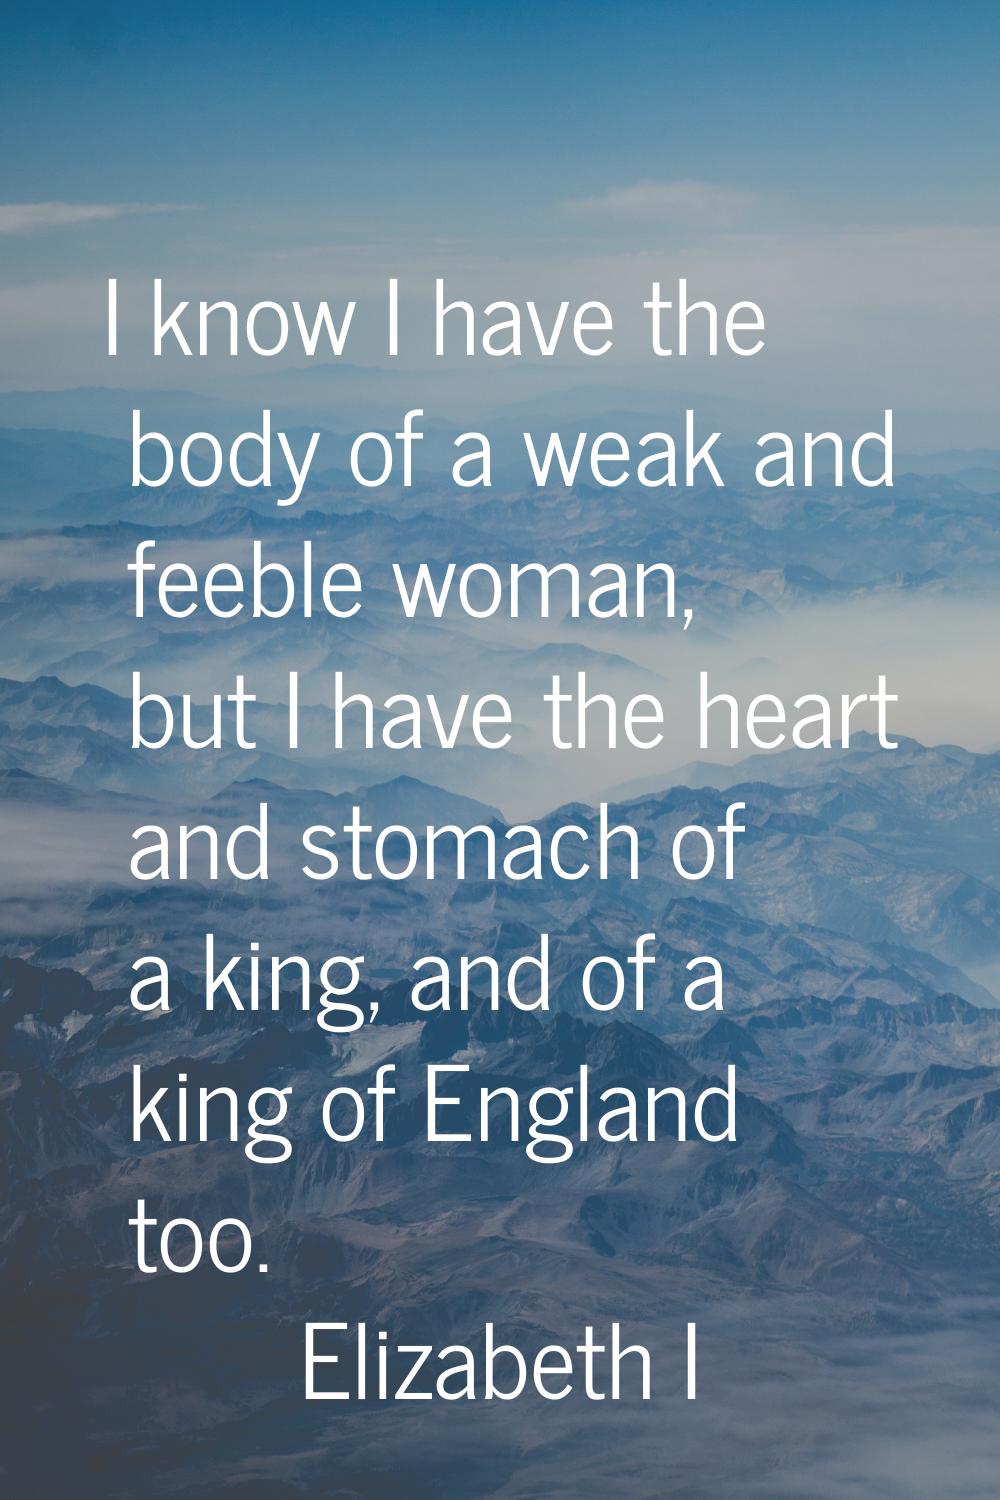 I know I have the body of a weak and feeble woman, but I have the heart and stomach of a king, and 